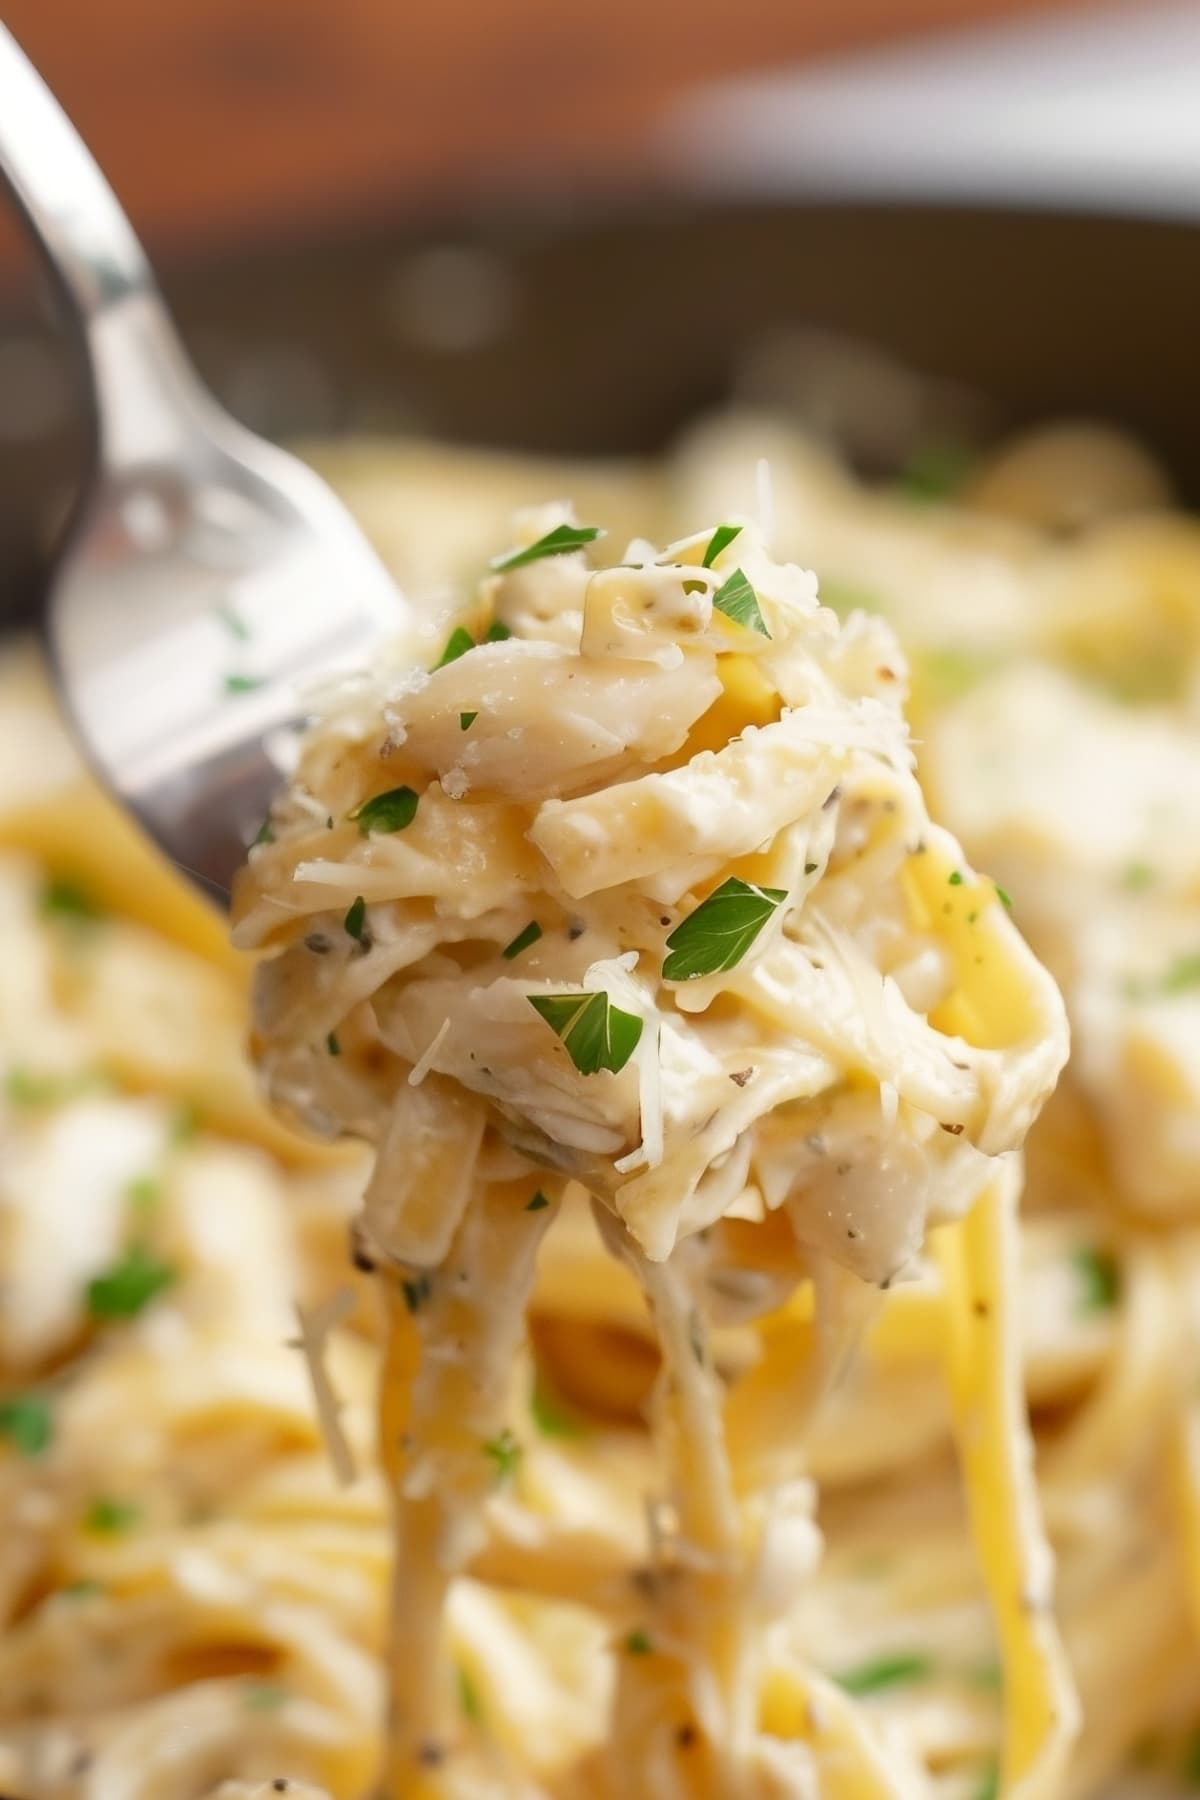 Savor the luxurious combination of delicate crab and smooth Alfredo sauce enveloping each strand of fettuccine served with a fork